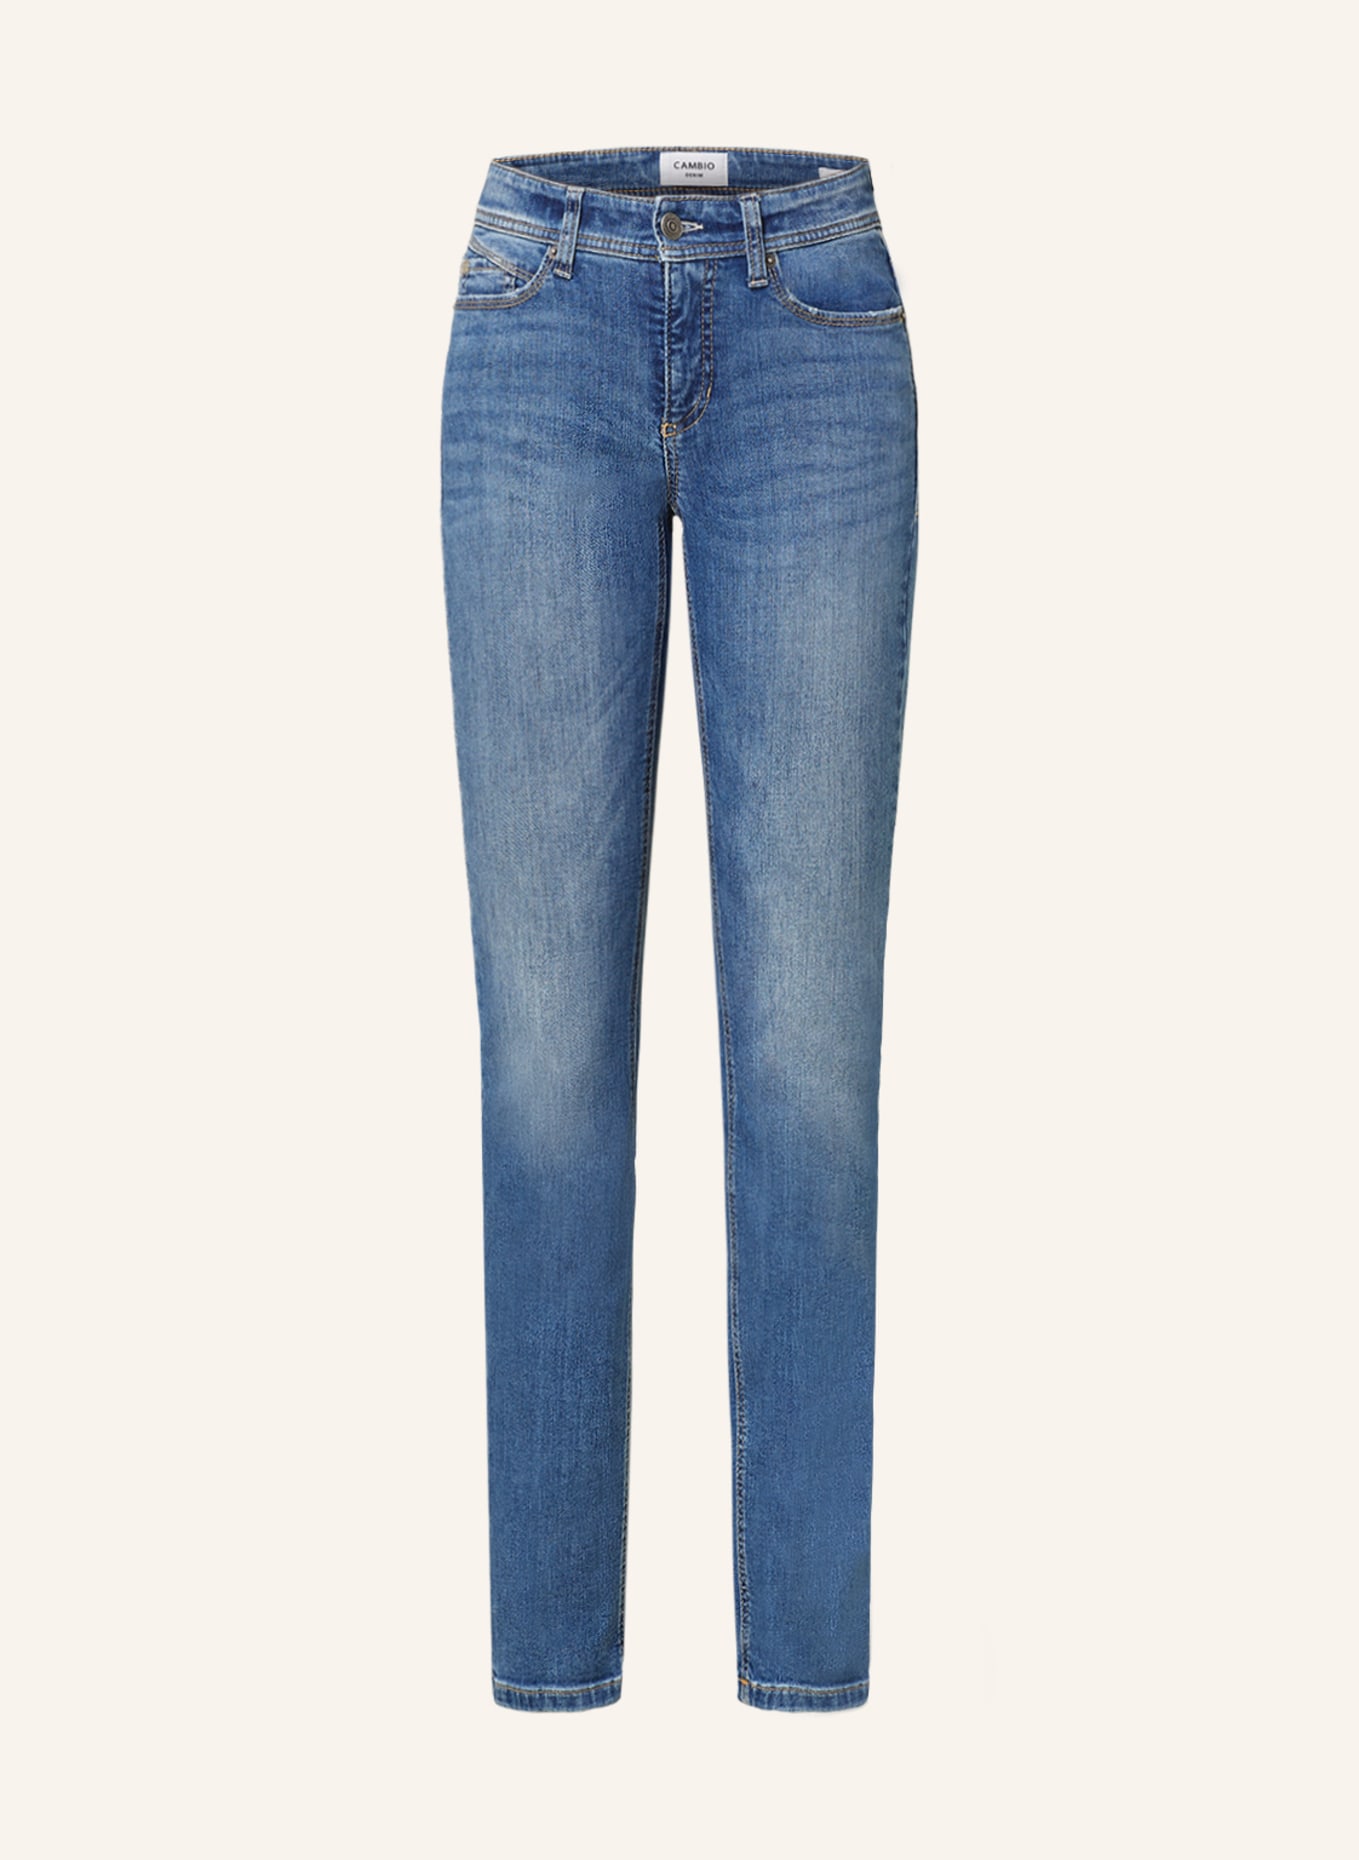 CAMBIO Skinny Jeans PARLA with decorative gems, Color: 5249 contrast used (Image 1)